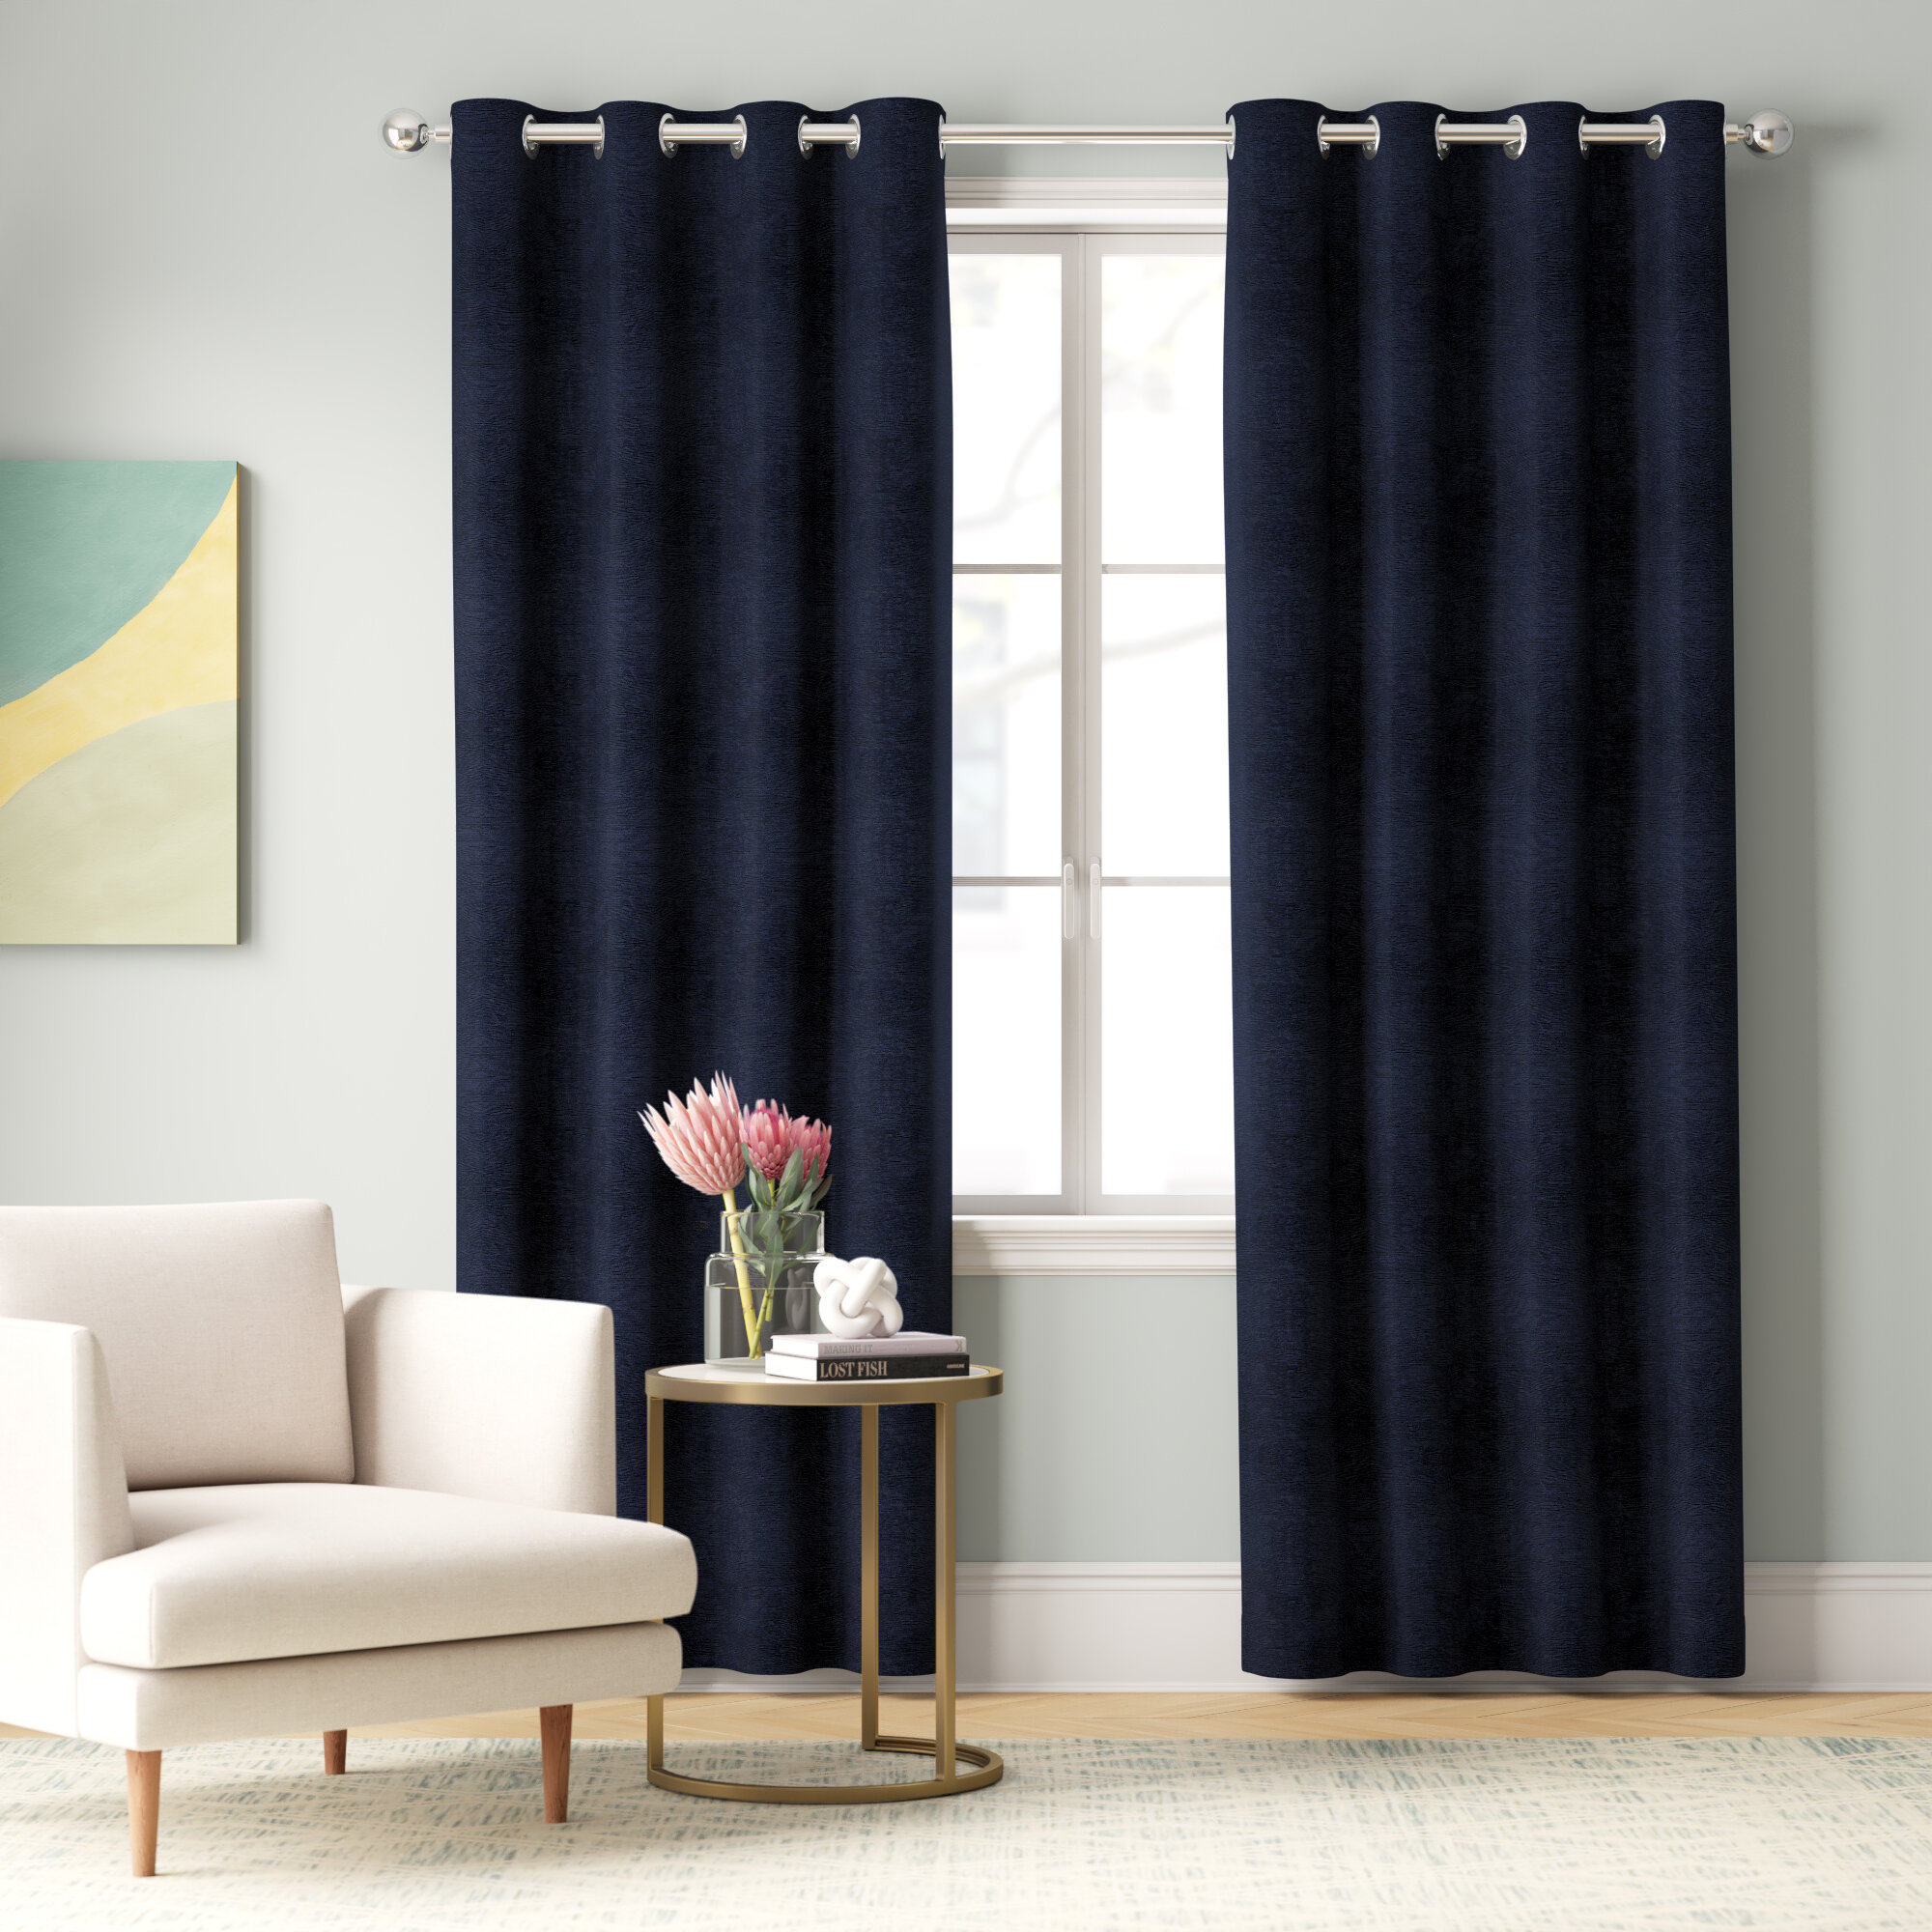 Blackout Curtains for Room Darkening Thermal Insulated Drapes 2 Panel Ivory 